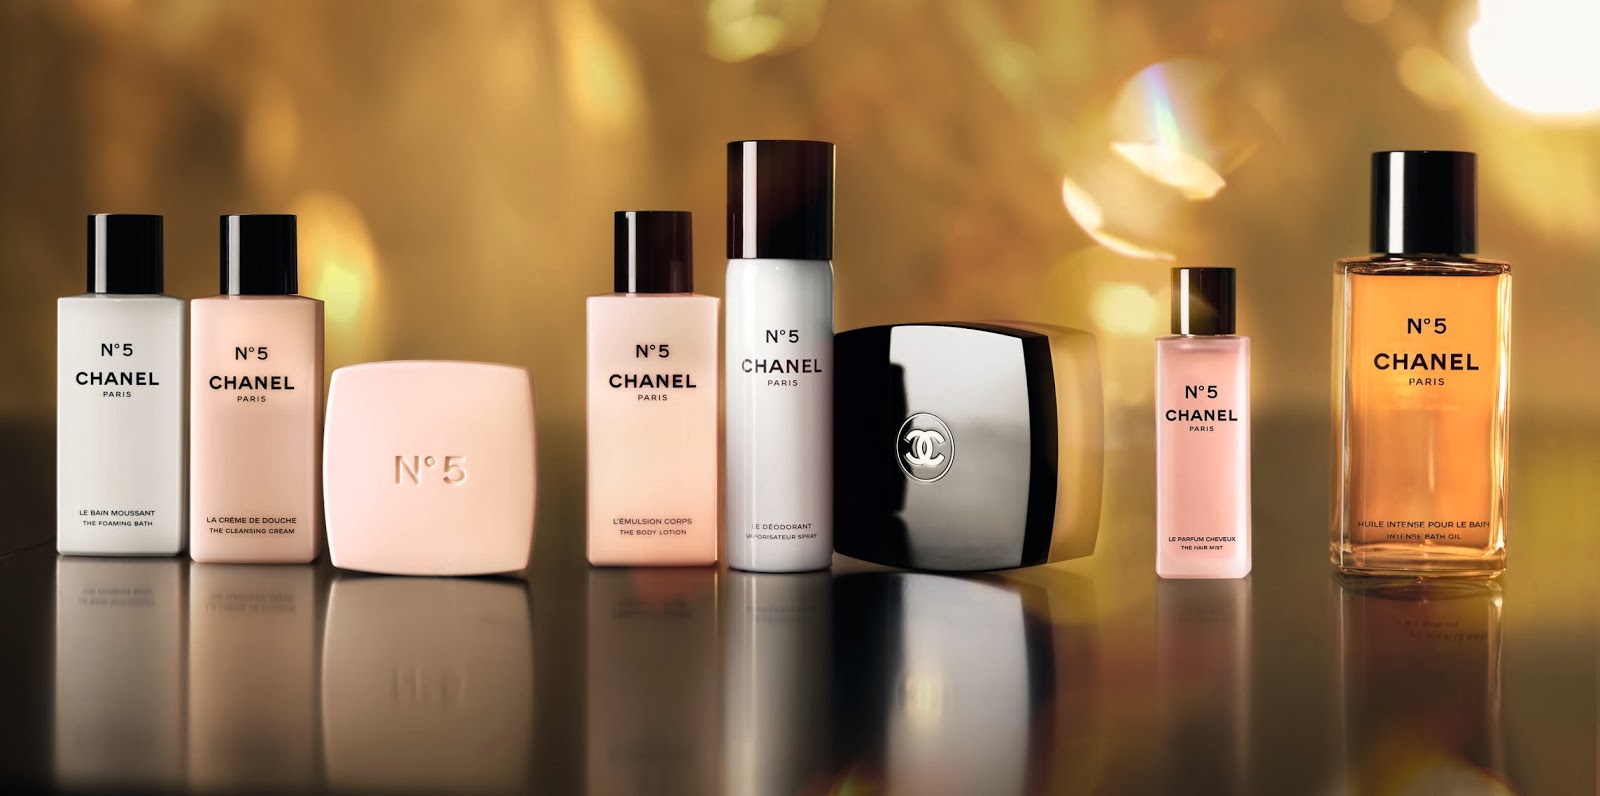 Make Up For Dolls: Chanel's Christmas No5 Bath & Body Range - preview